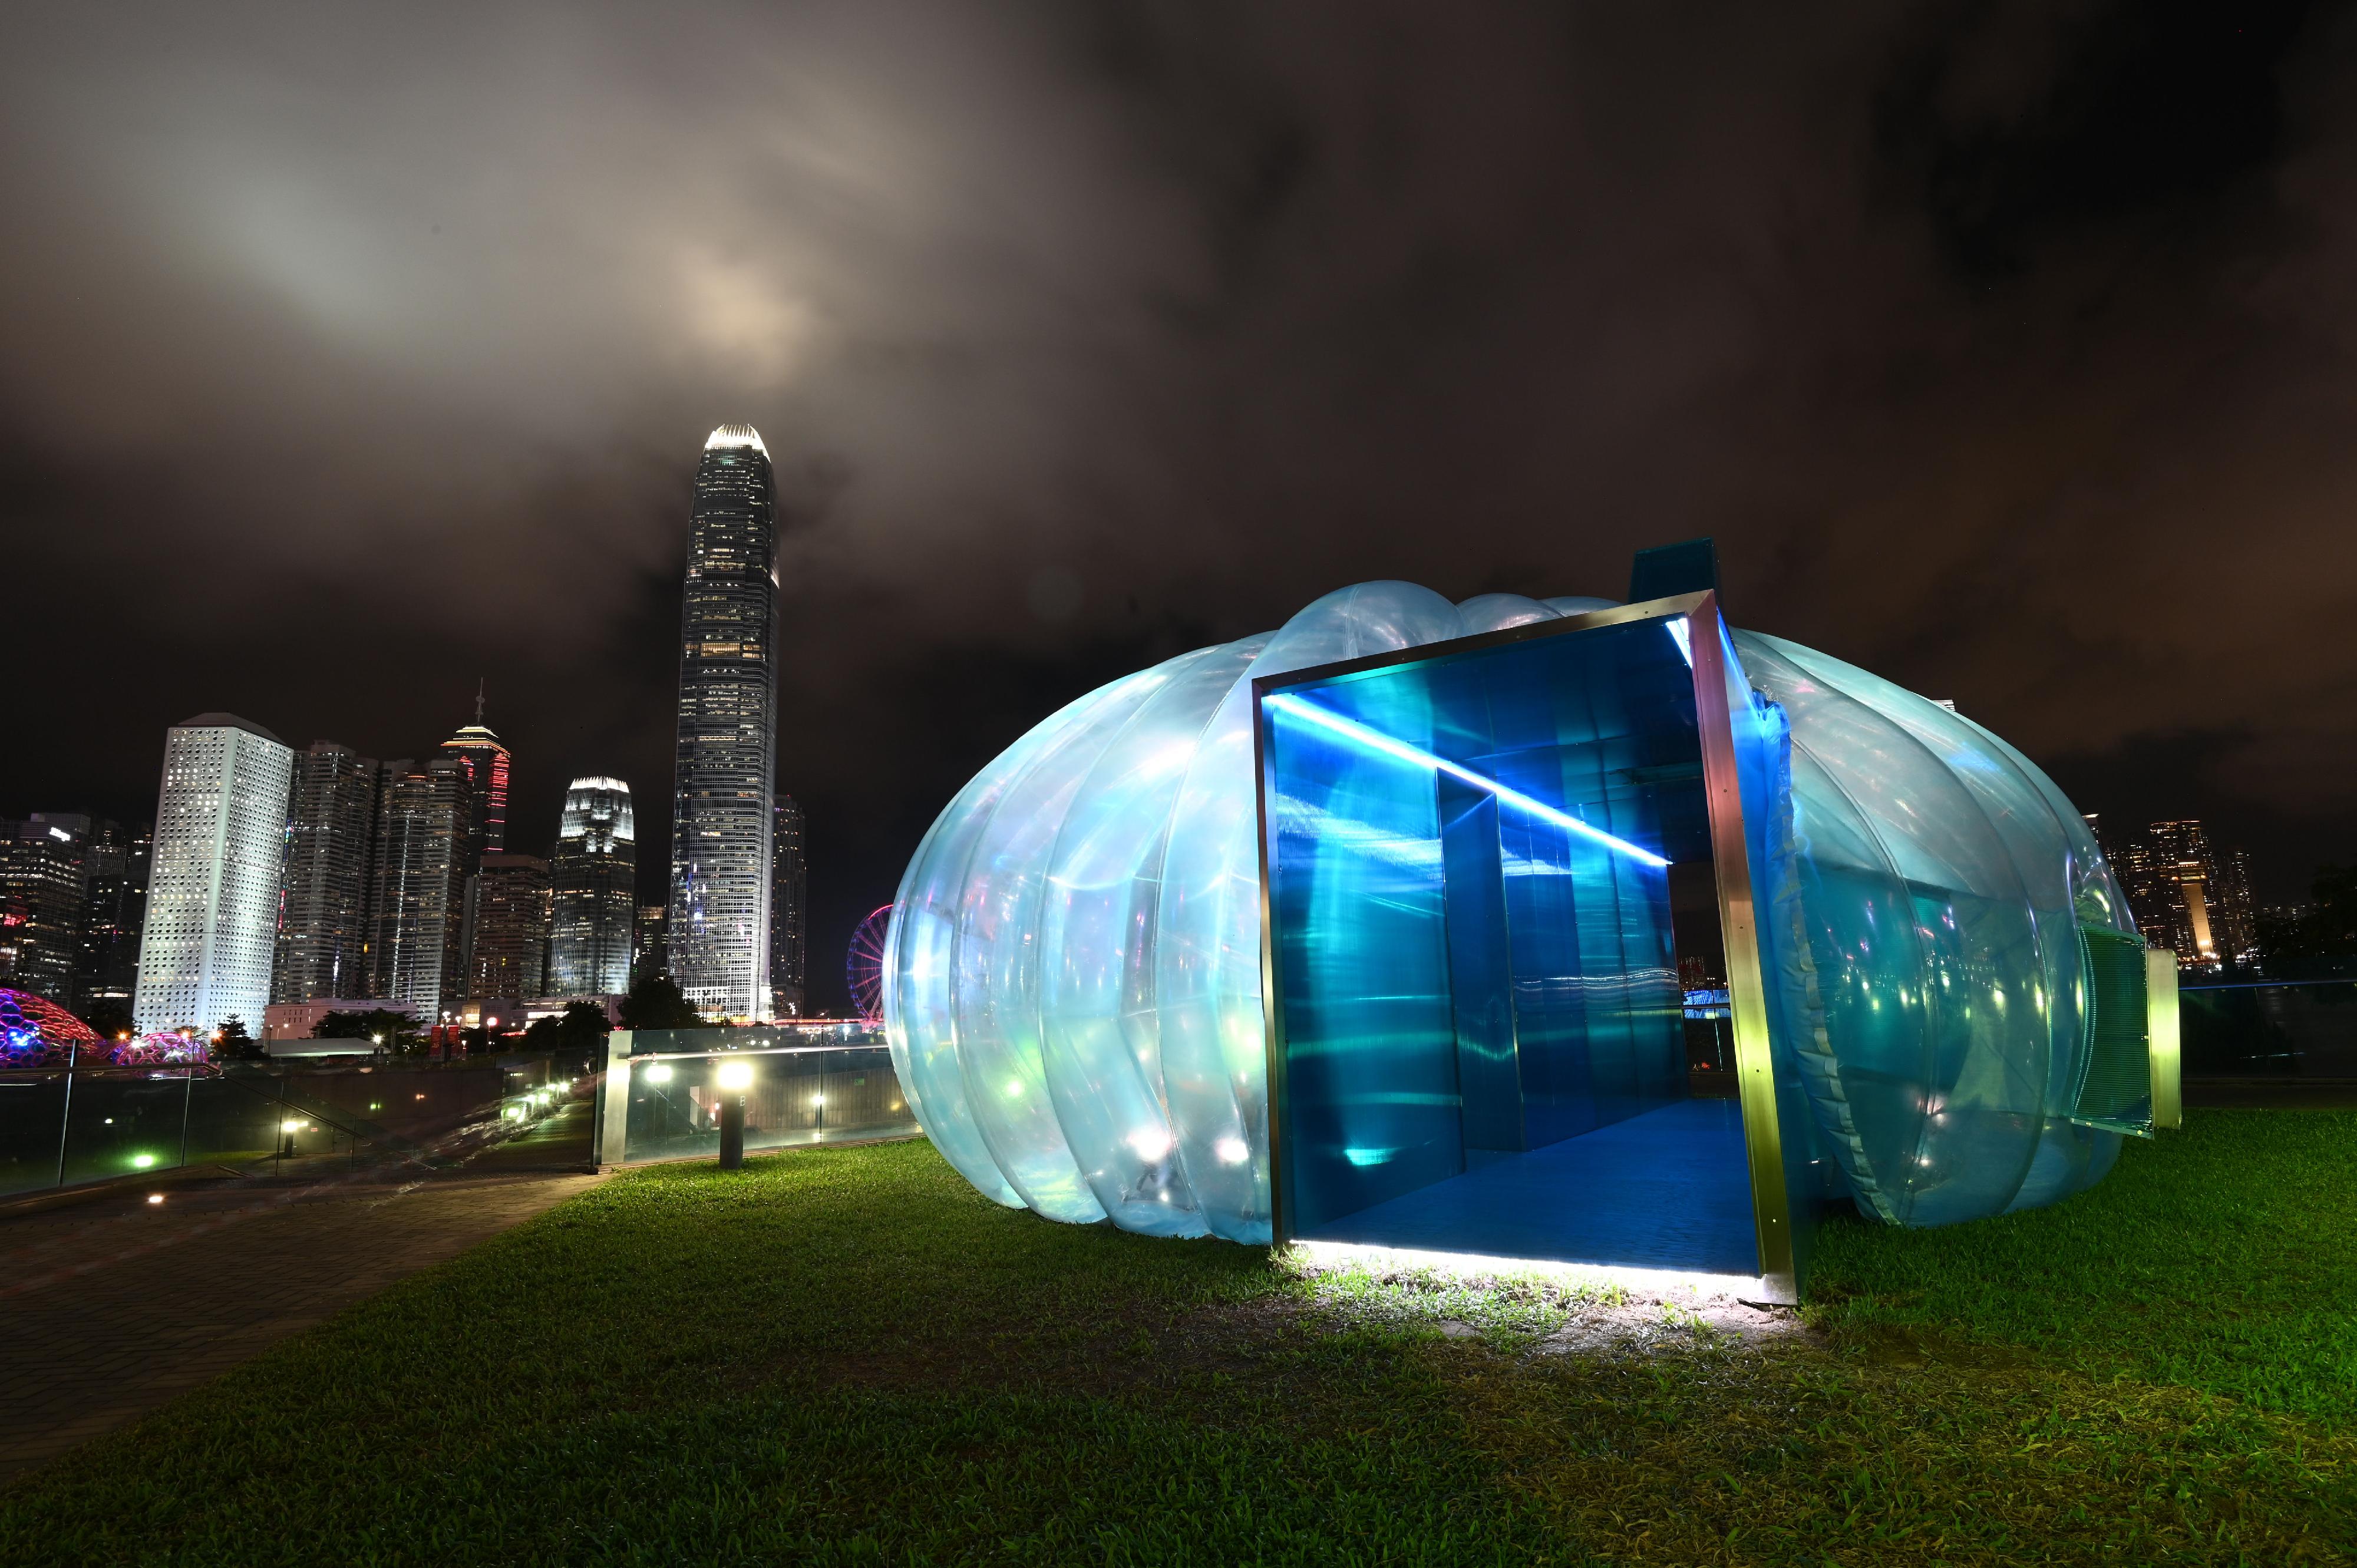 The opening ceremony of the exhibition "Art@Harbour" was held at the Central and Western District Promenade (Central Section) today (June 22). Picture shows one of the artworks, "Water Capsule Submarine", under "The Hong Kong Jockey Club Series: Science in Art".